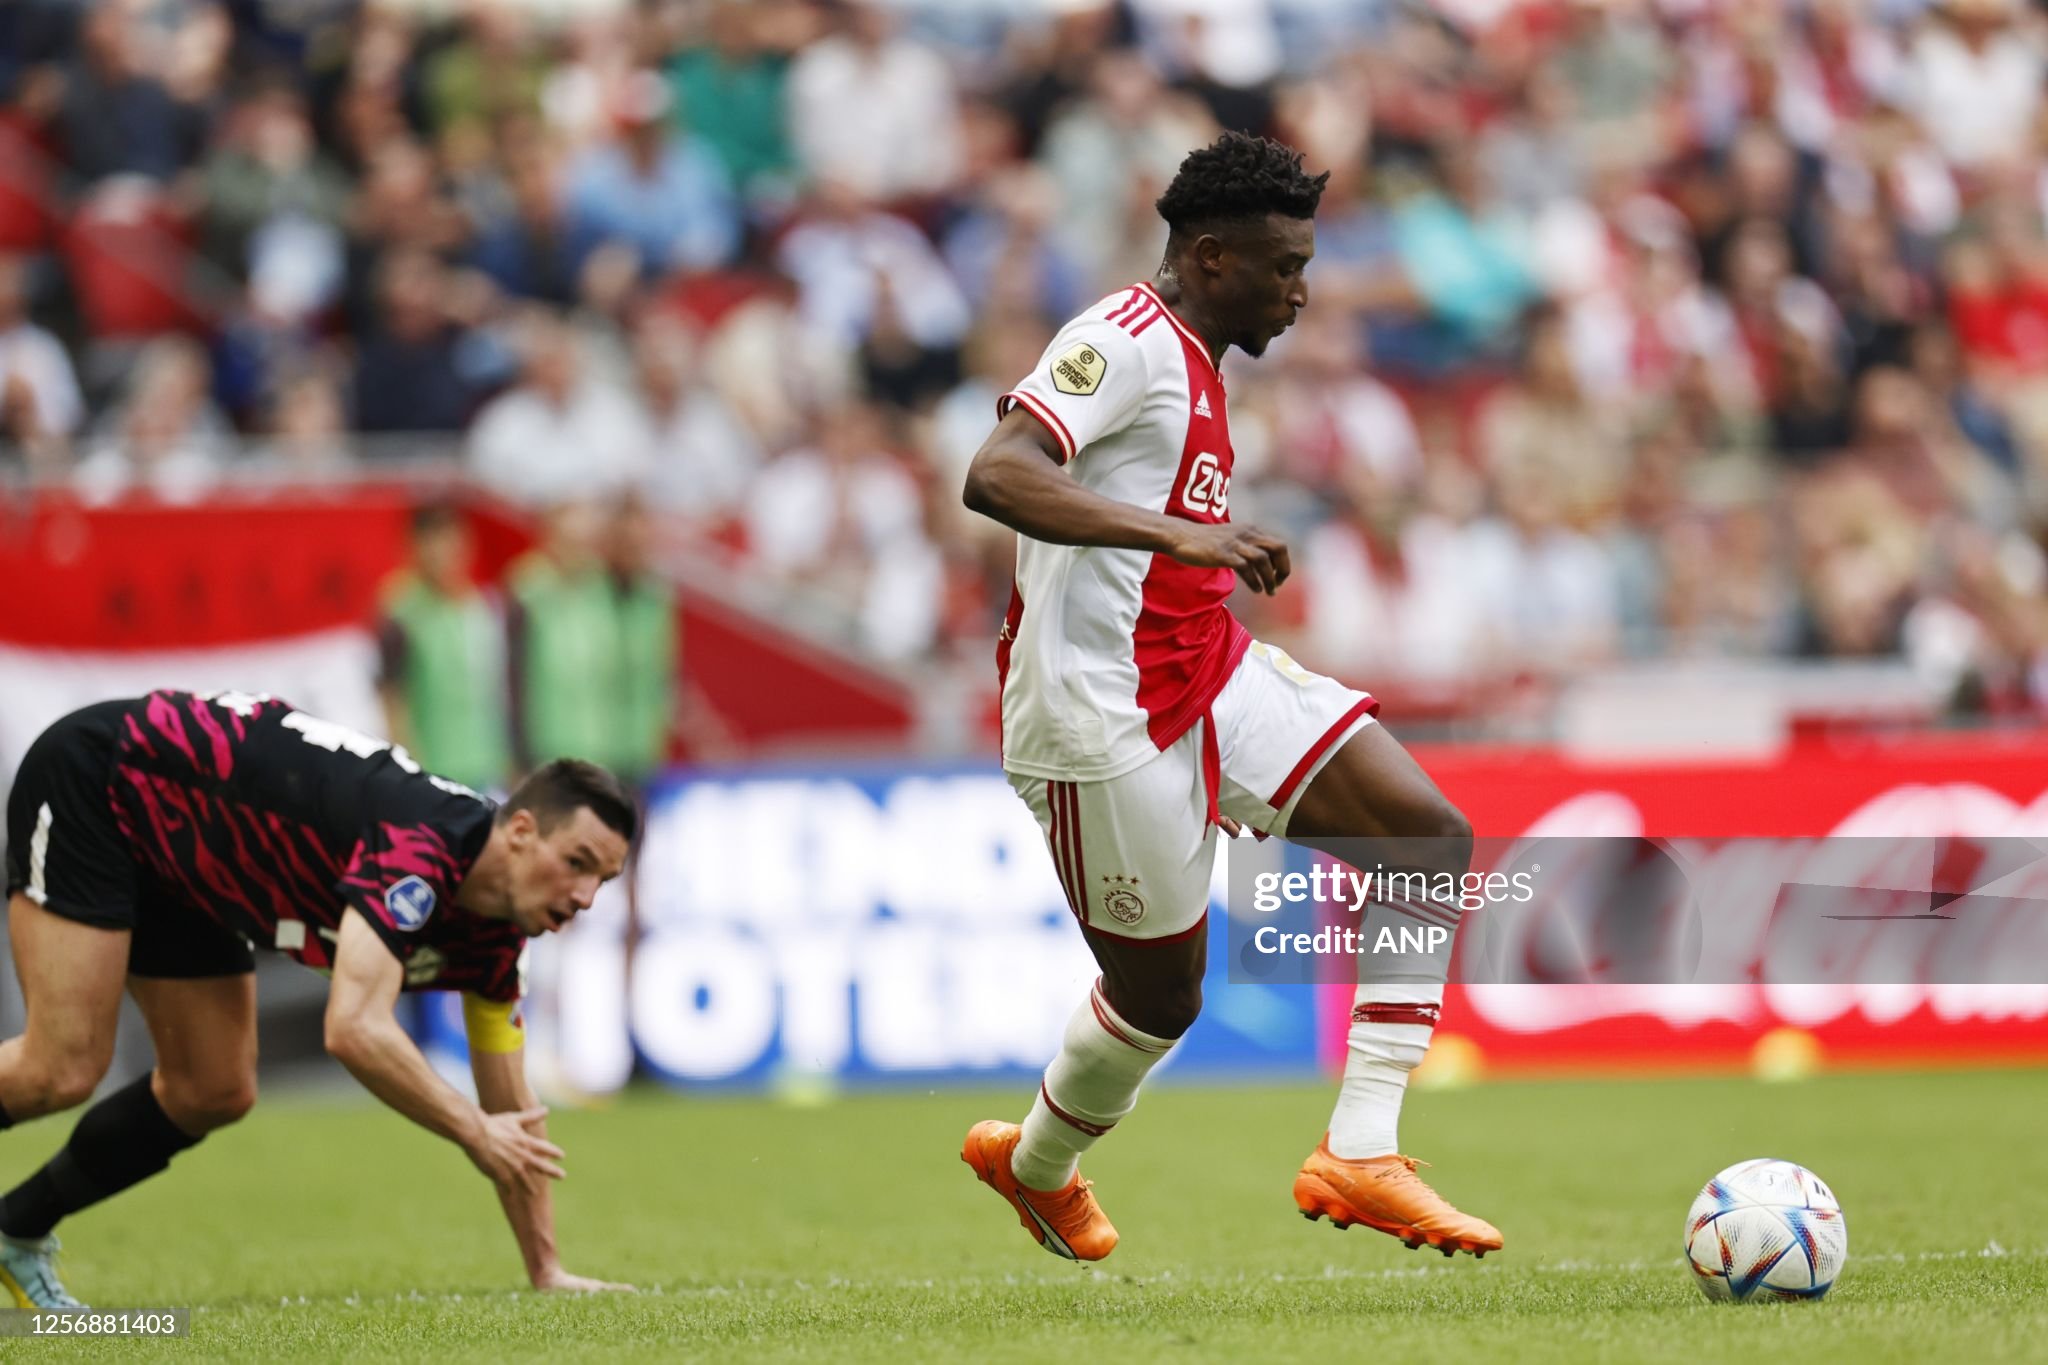 Kudus is fed up with the situation at Ajax and wants to force a transfer to the Premier League